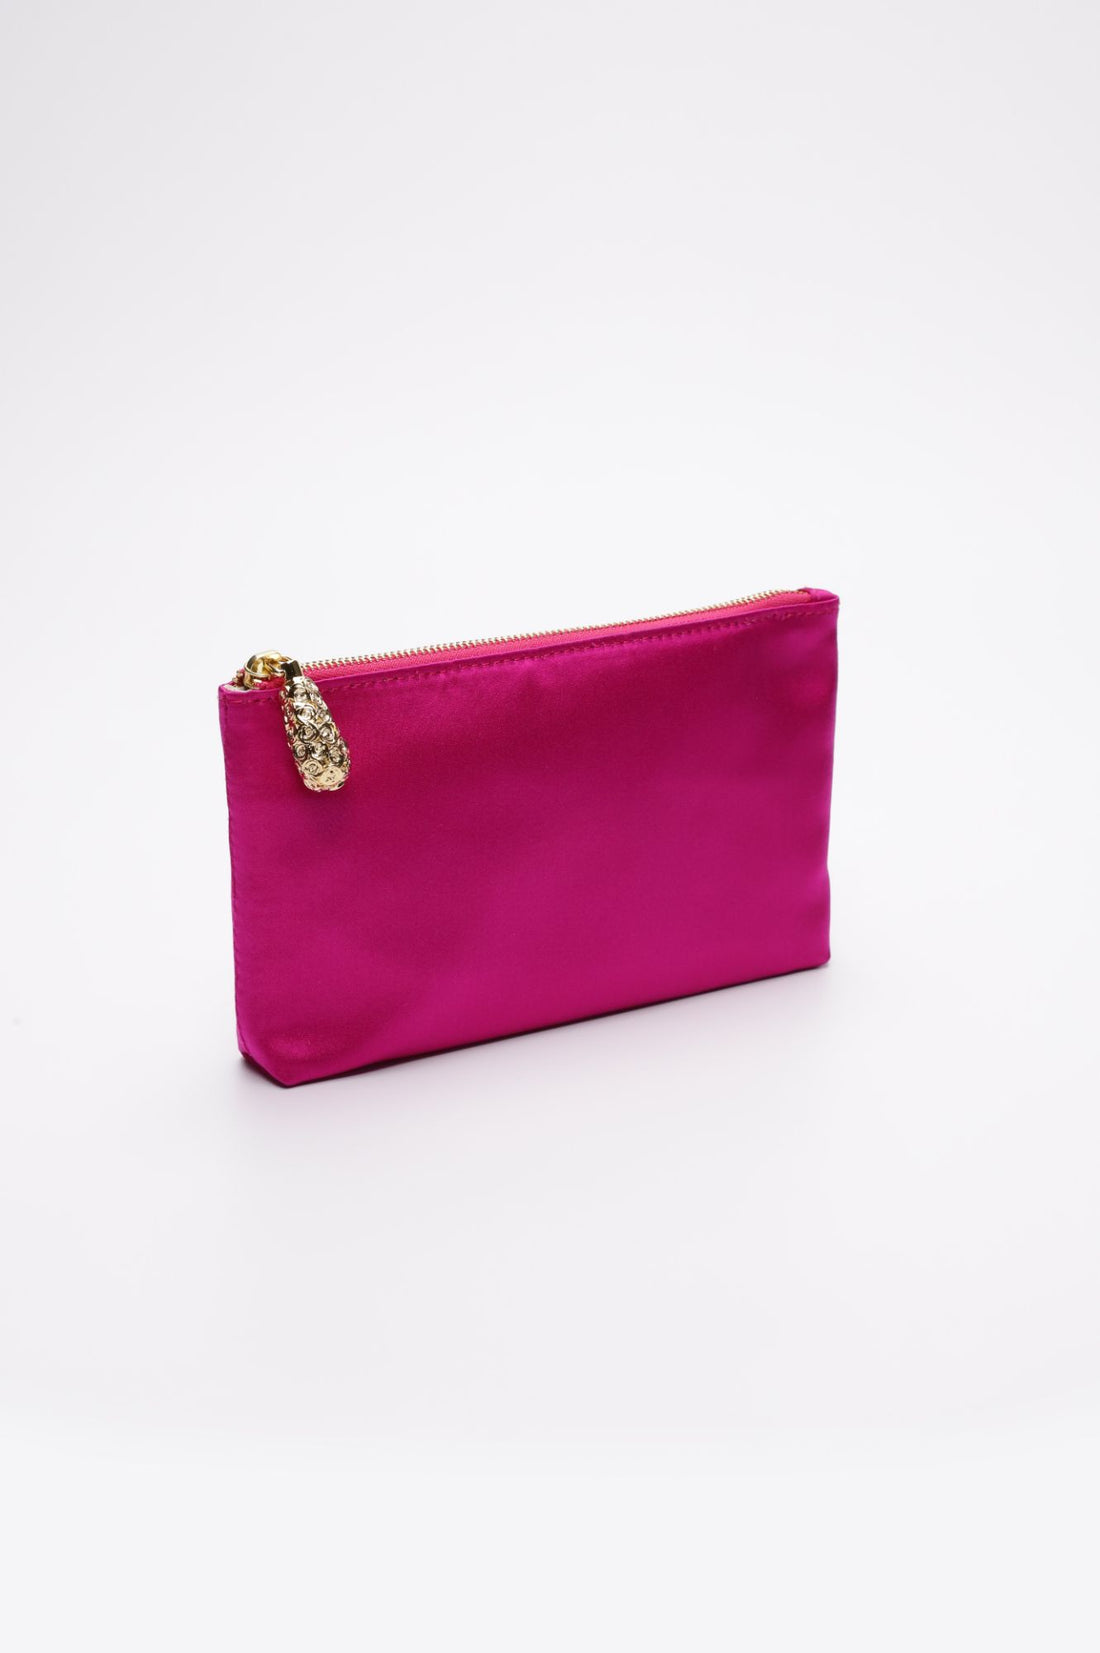 Side angle view of Hot pink satin pouch.